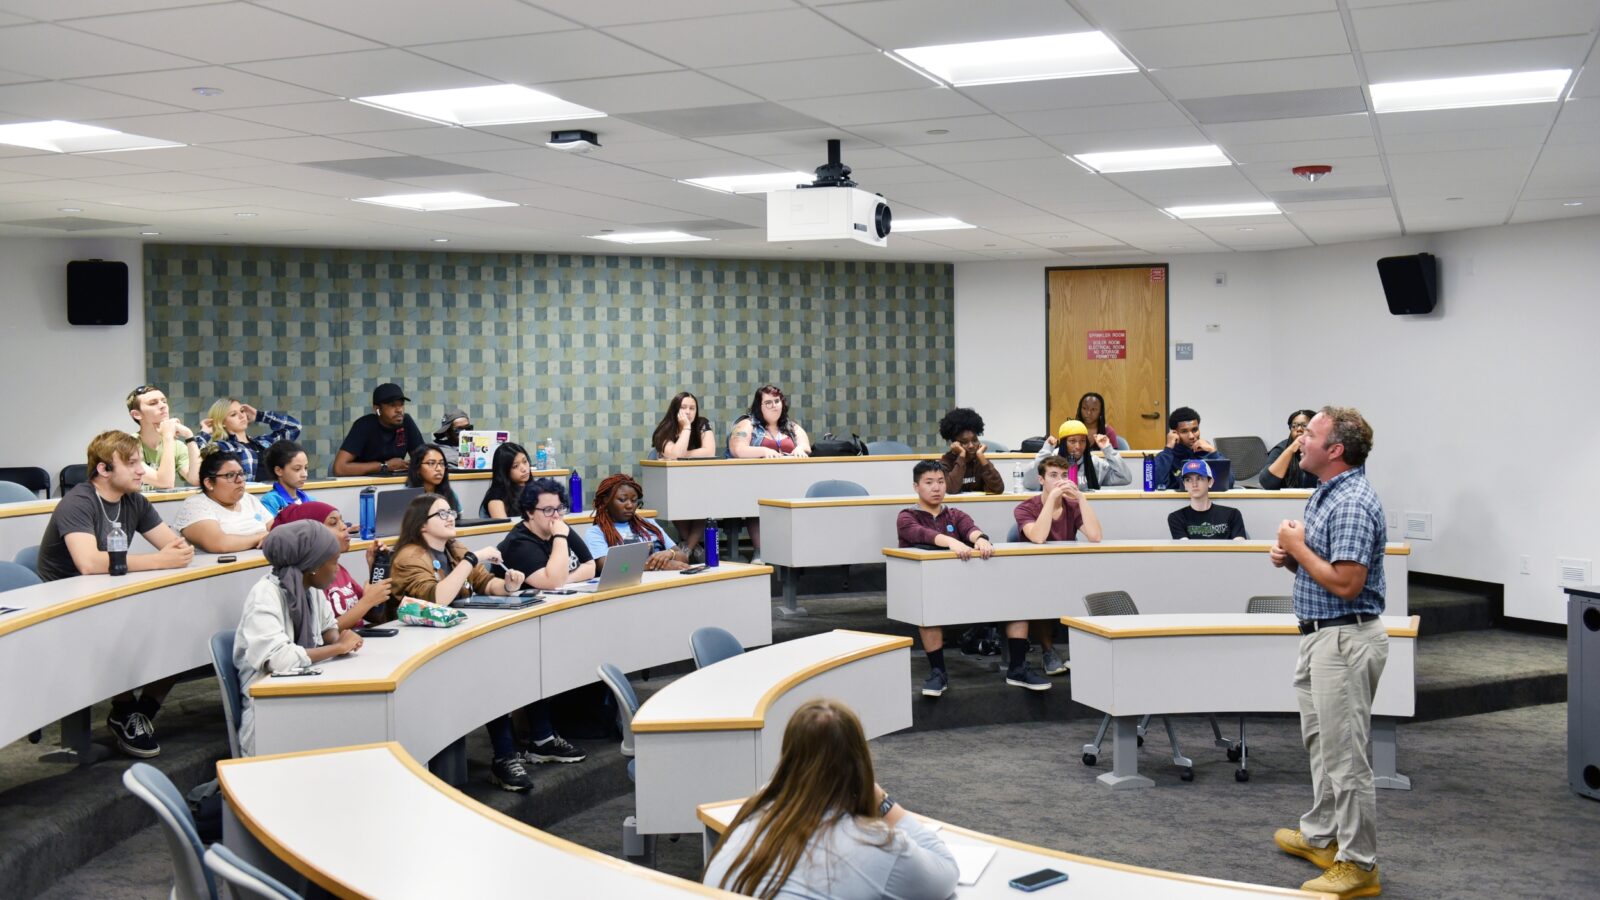 A group of 25 students sit in a classroom with rounded tables listening to a professor speaking at the front of the room